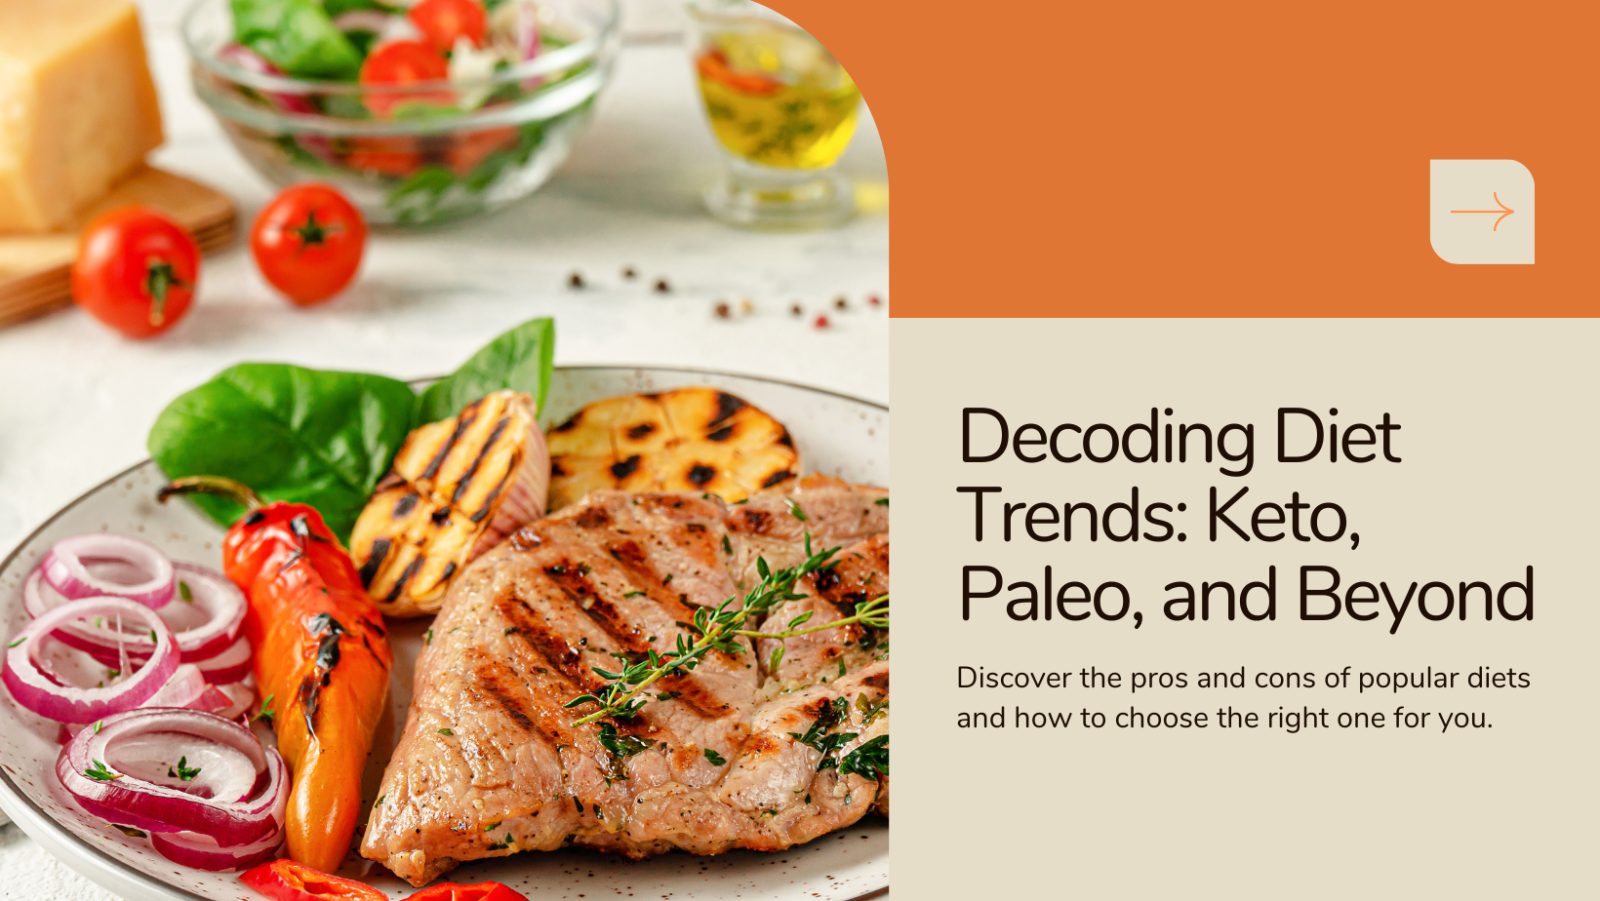 Decoding Diet Trends: Keto, Paleo, and Beyond - Navigating the Nutritional Maze